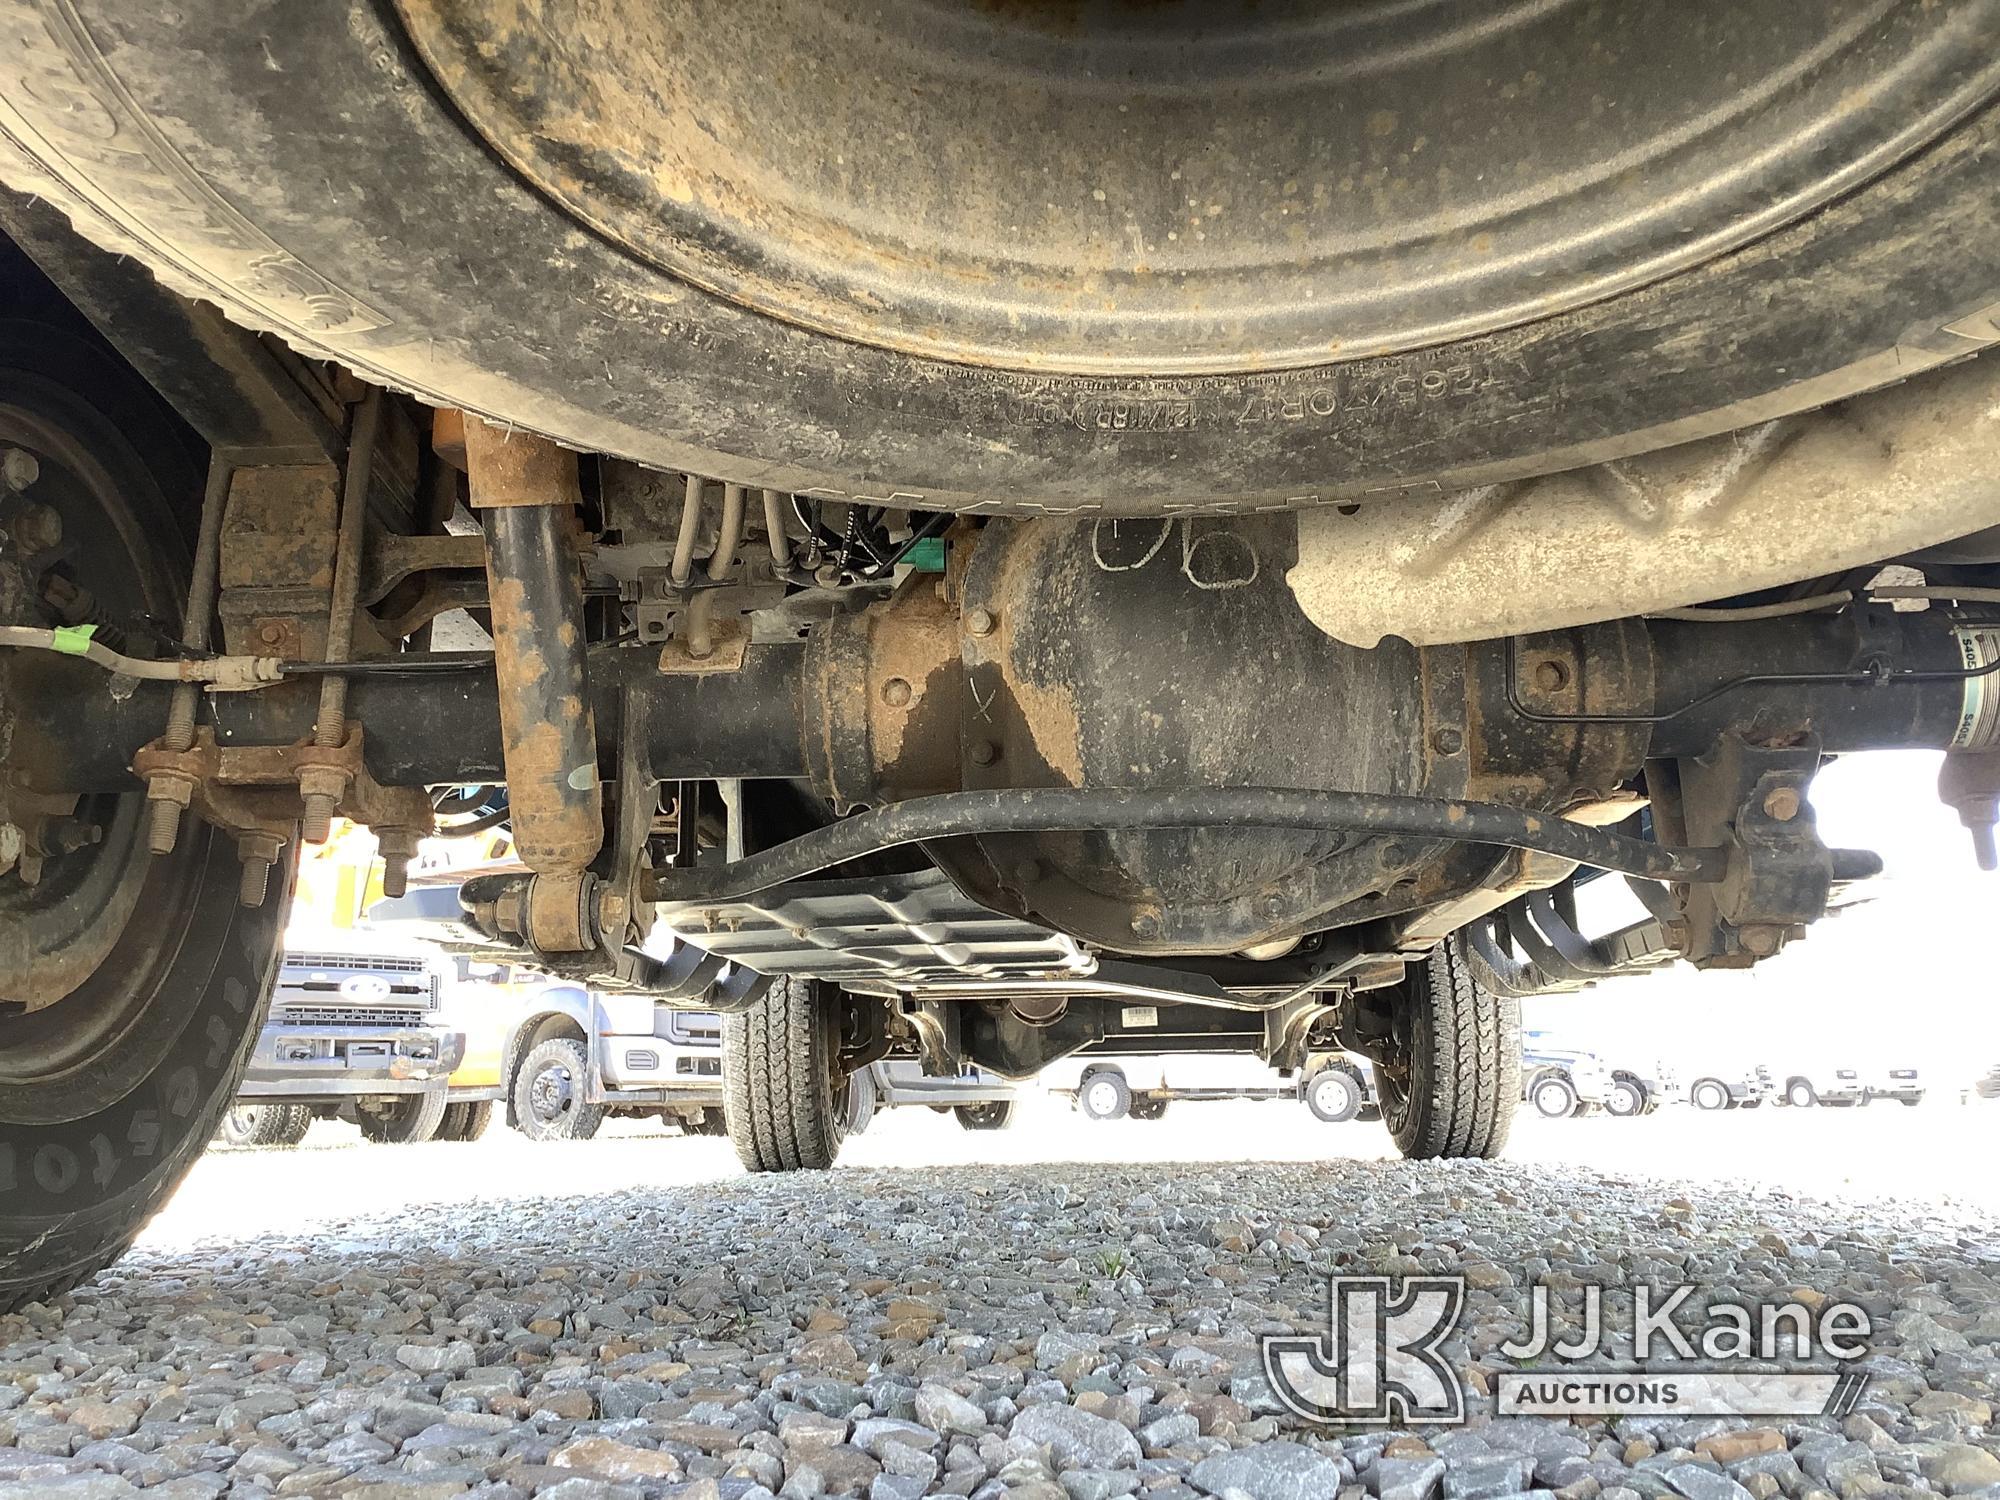 (Smock, PA) 2018 Ford F250 4x4 Extended-Cab Enclosed Service Truck Runs & Moves, Rust & Body Damage